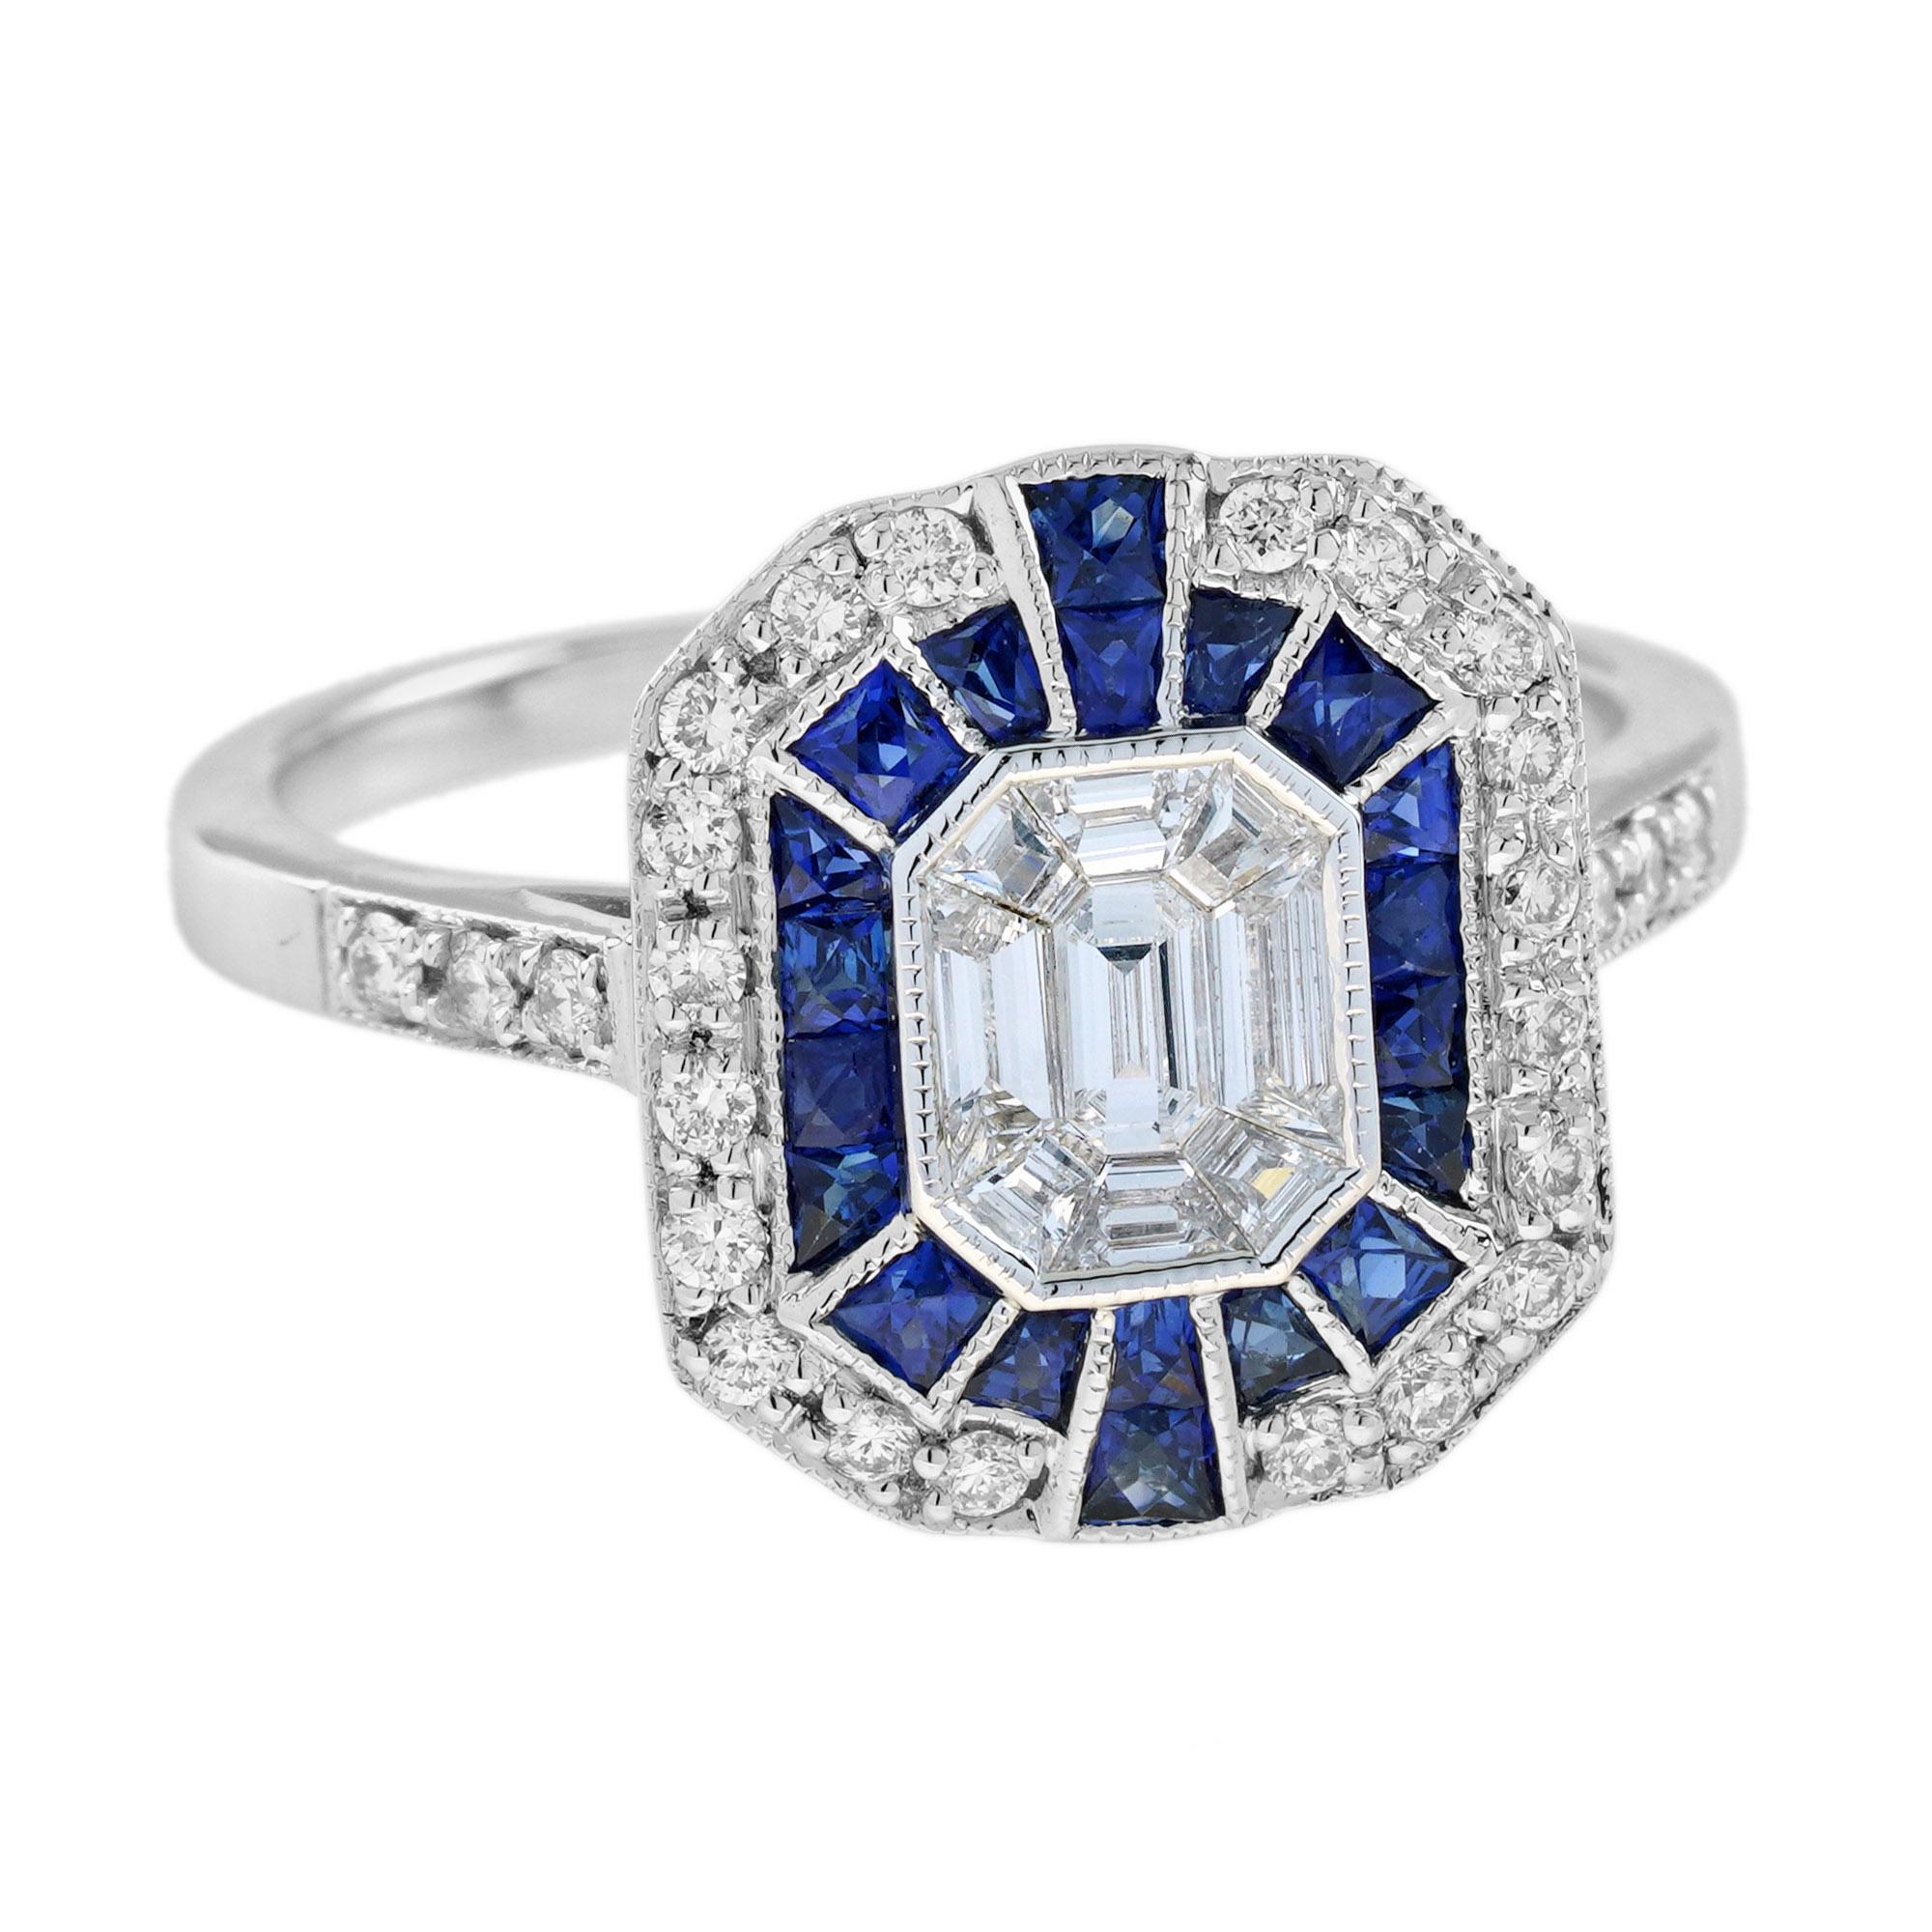 Emerald Cut Illusion Set Diamond and Blue Sapphire Art Deco Style Ring in 18K White Gold